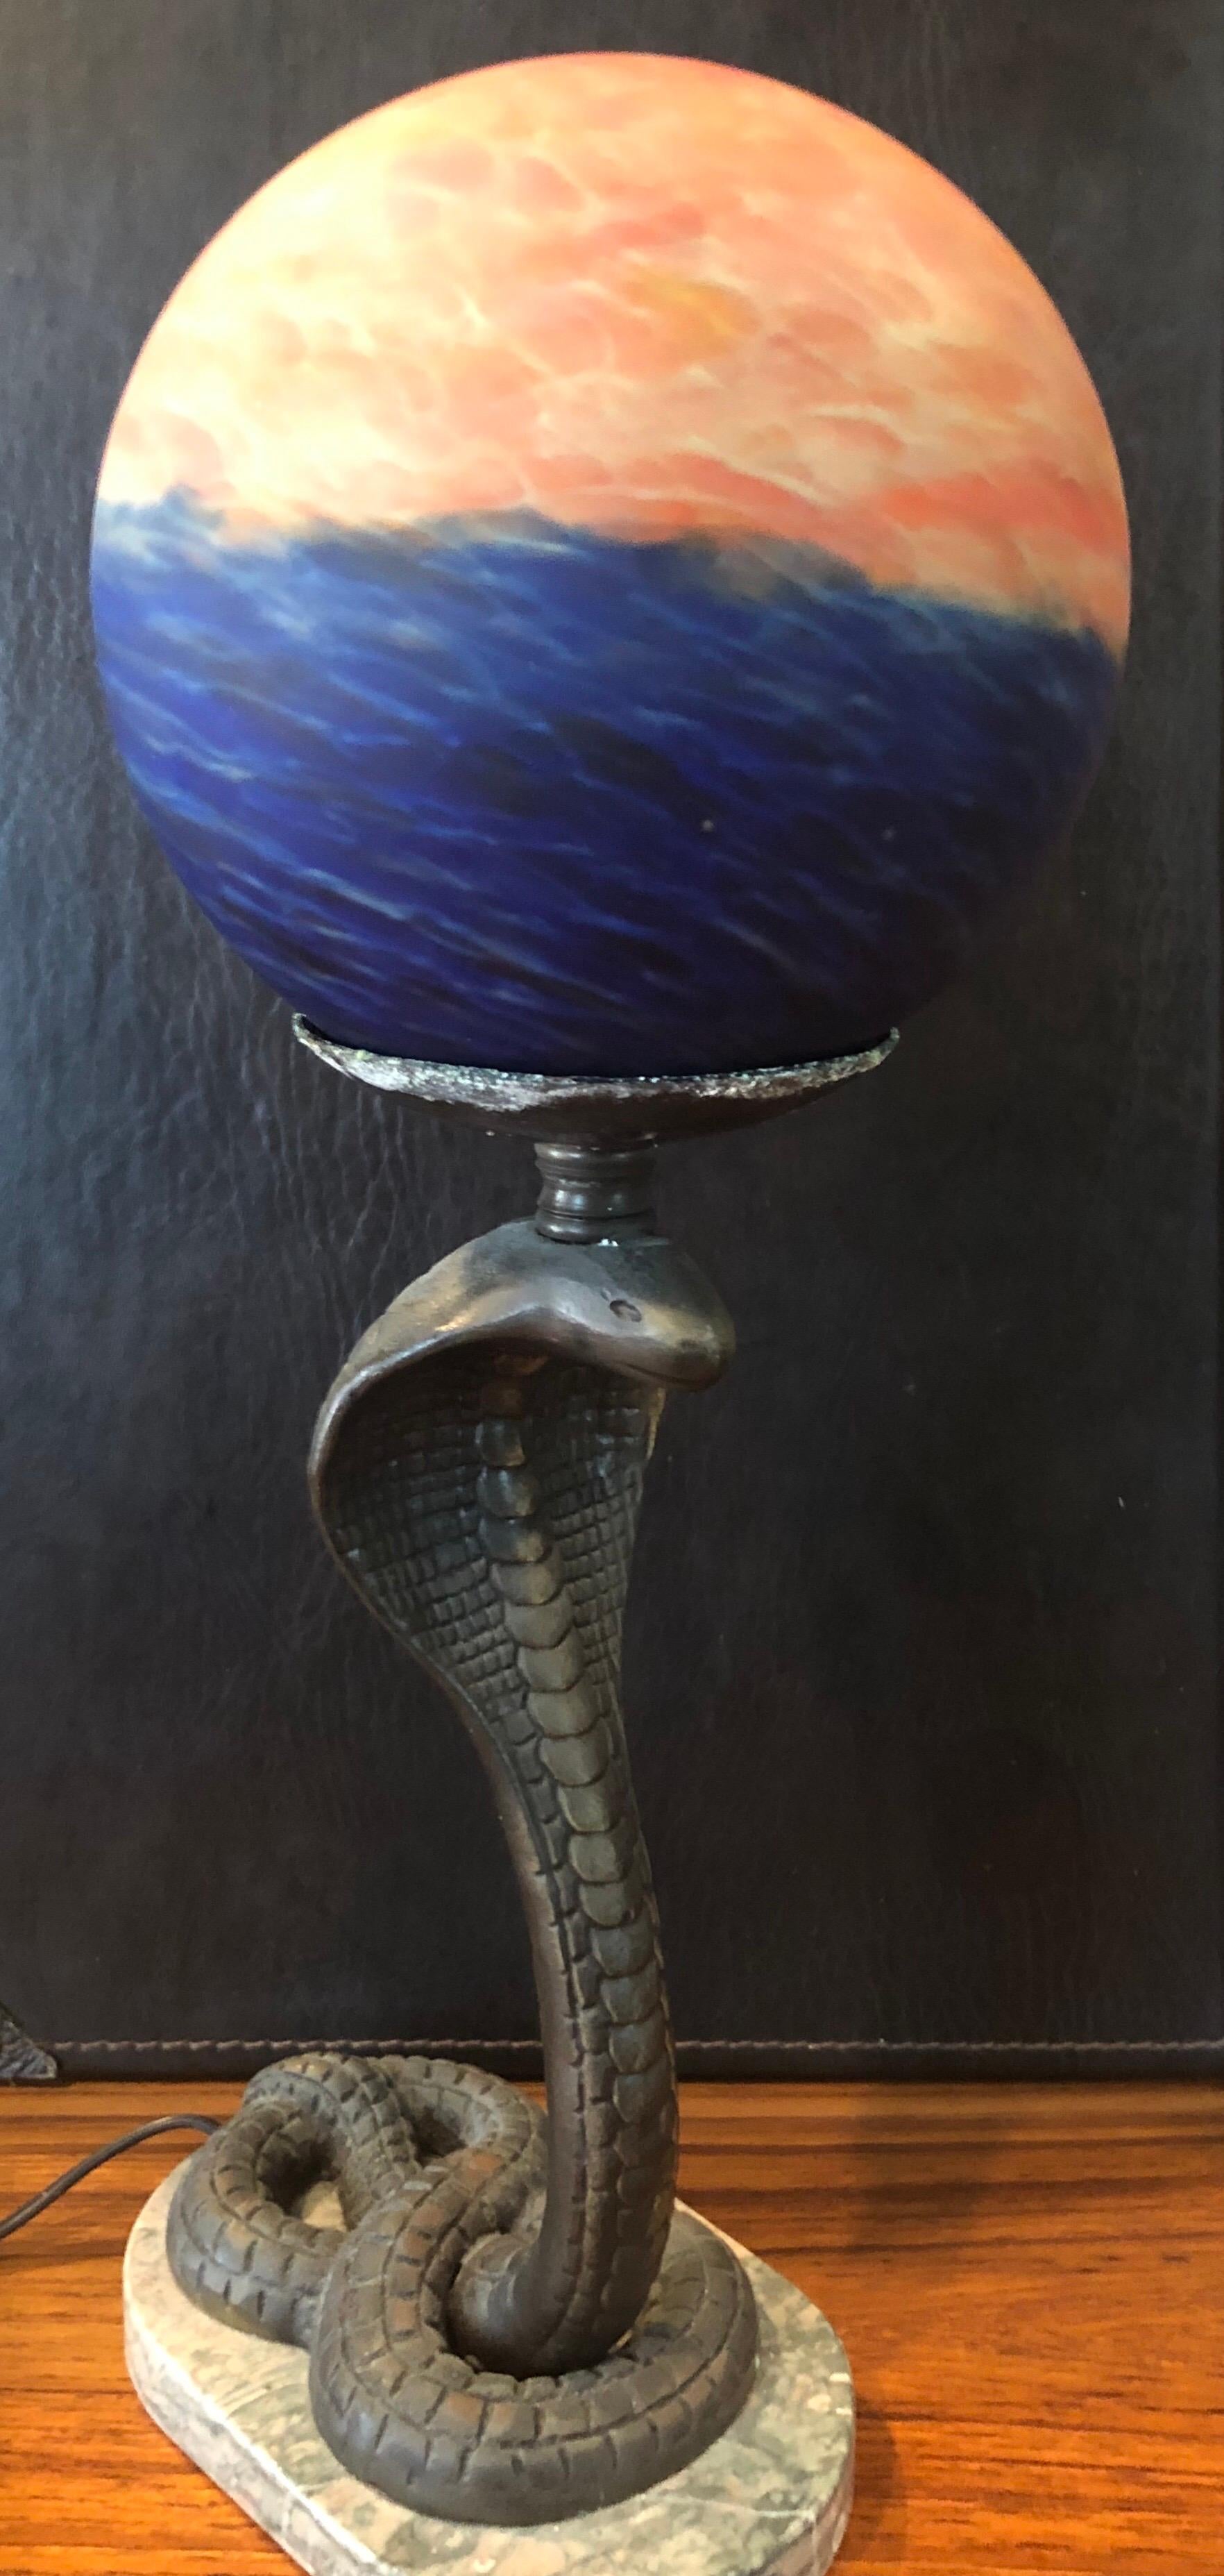 A very cool Art Deco bronze cobra / snake table lamp on marble base with colorful round globe, circa 1960s. The lamp depicts a highly detailed cobra snake in a strike position supporting a round glass globe shade. 

Specifications:
Height: